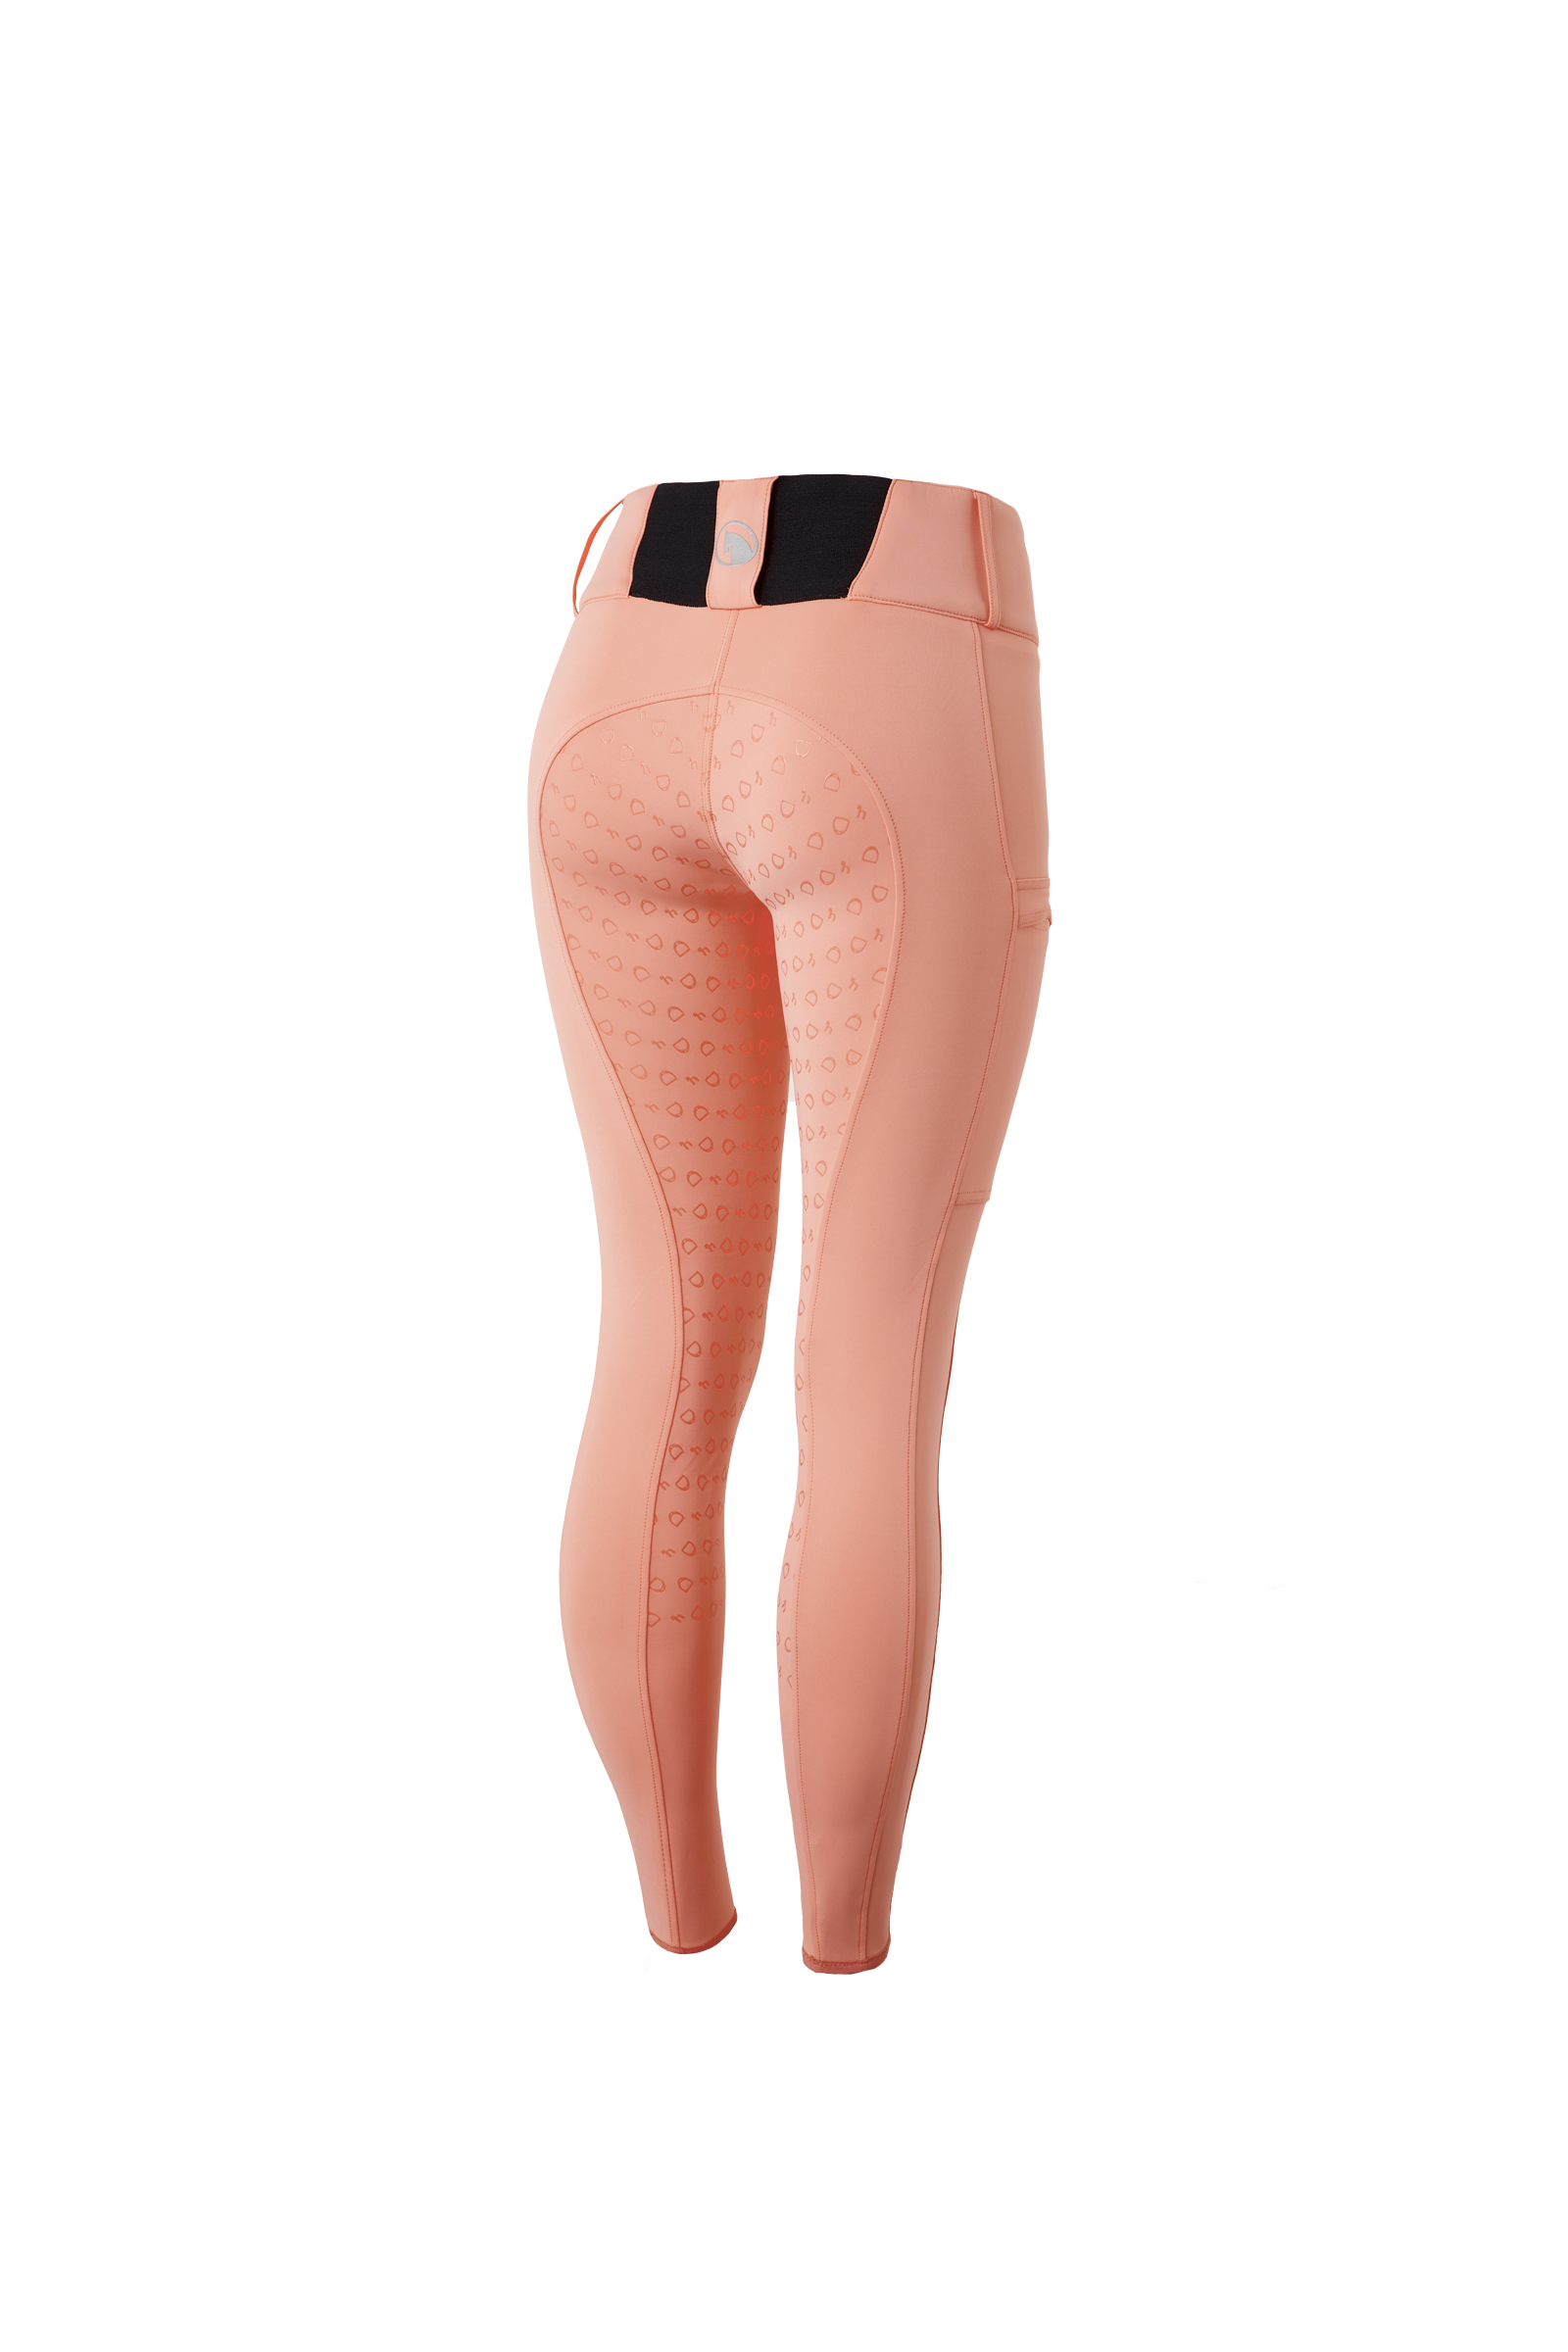 Horze Women's Active Full Seat Breeches - Marsala Red - Horze-36277-MSRE -  Tack Of The Day